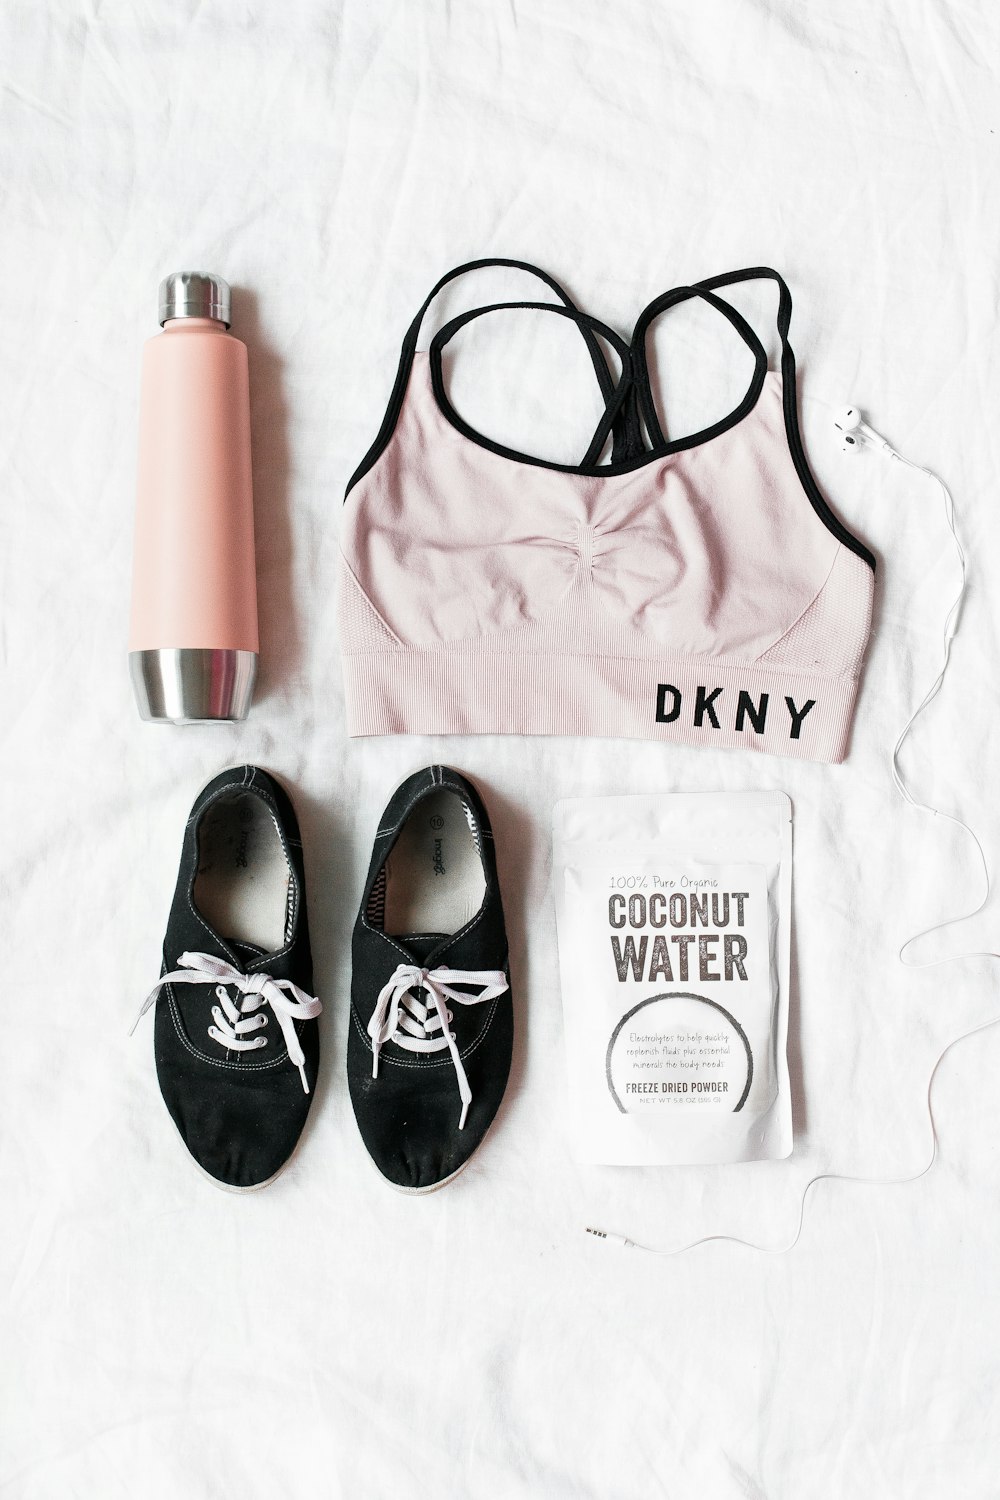 pair of black lace-up shoes near DKNY sport bra